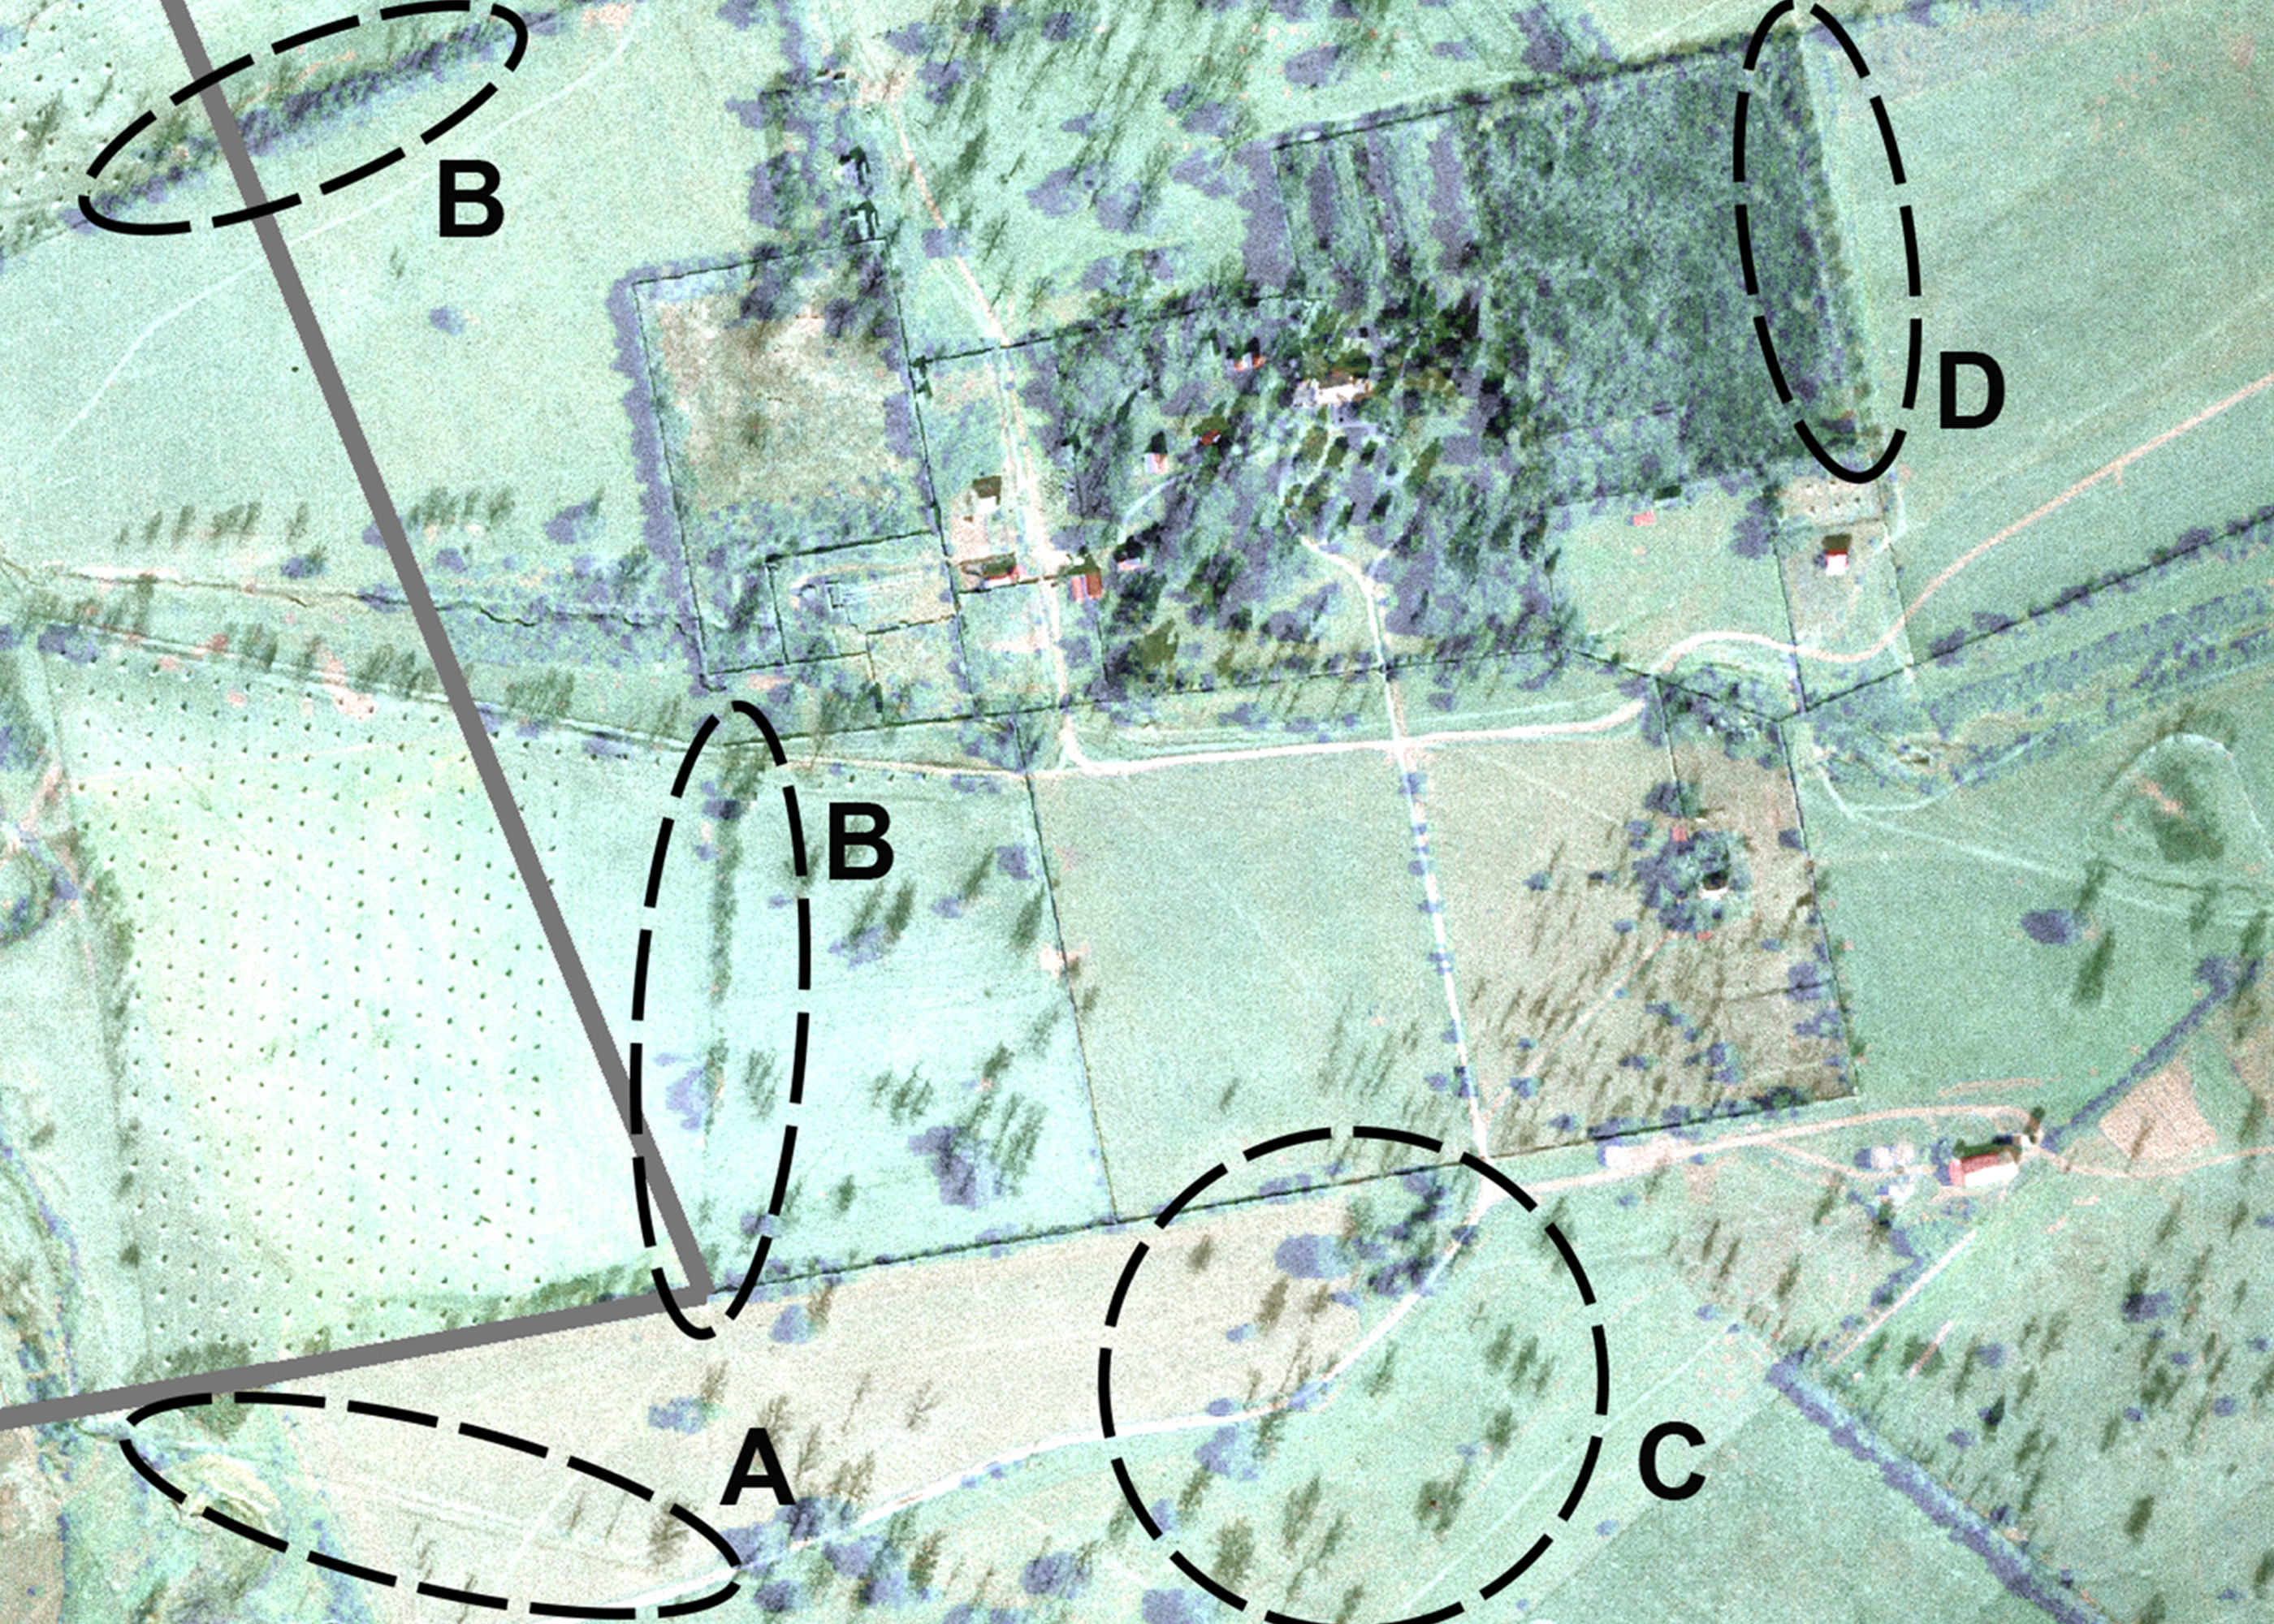 overhead view of map with circles drawn in certain areas